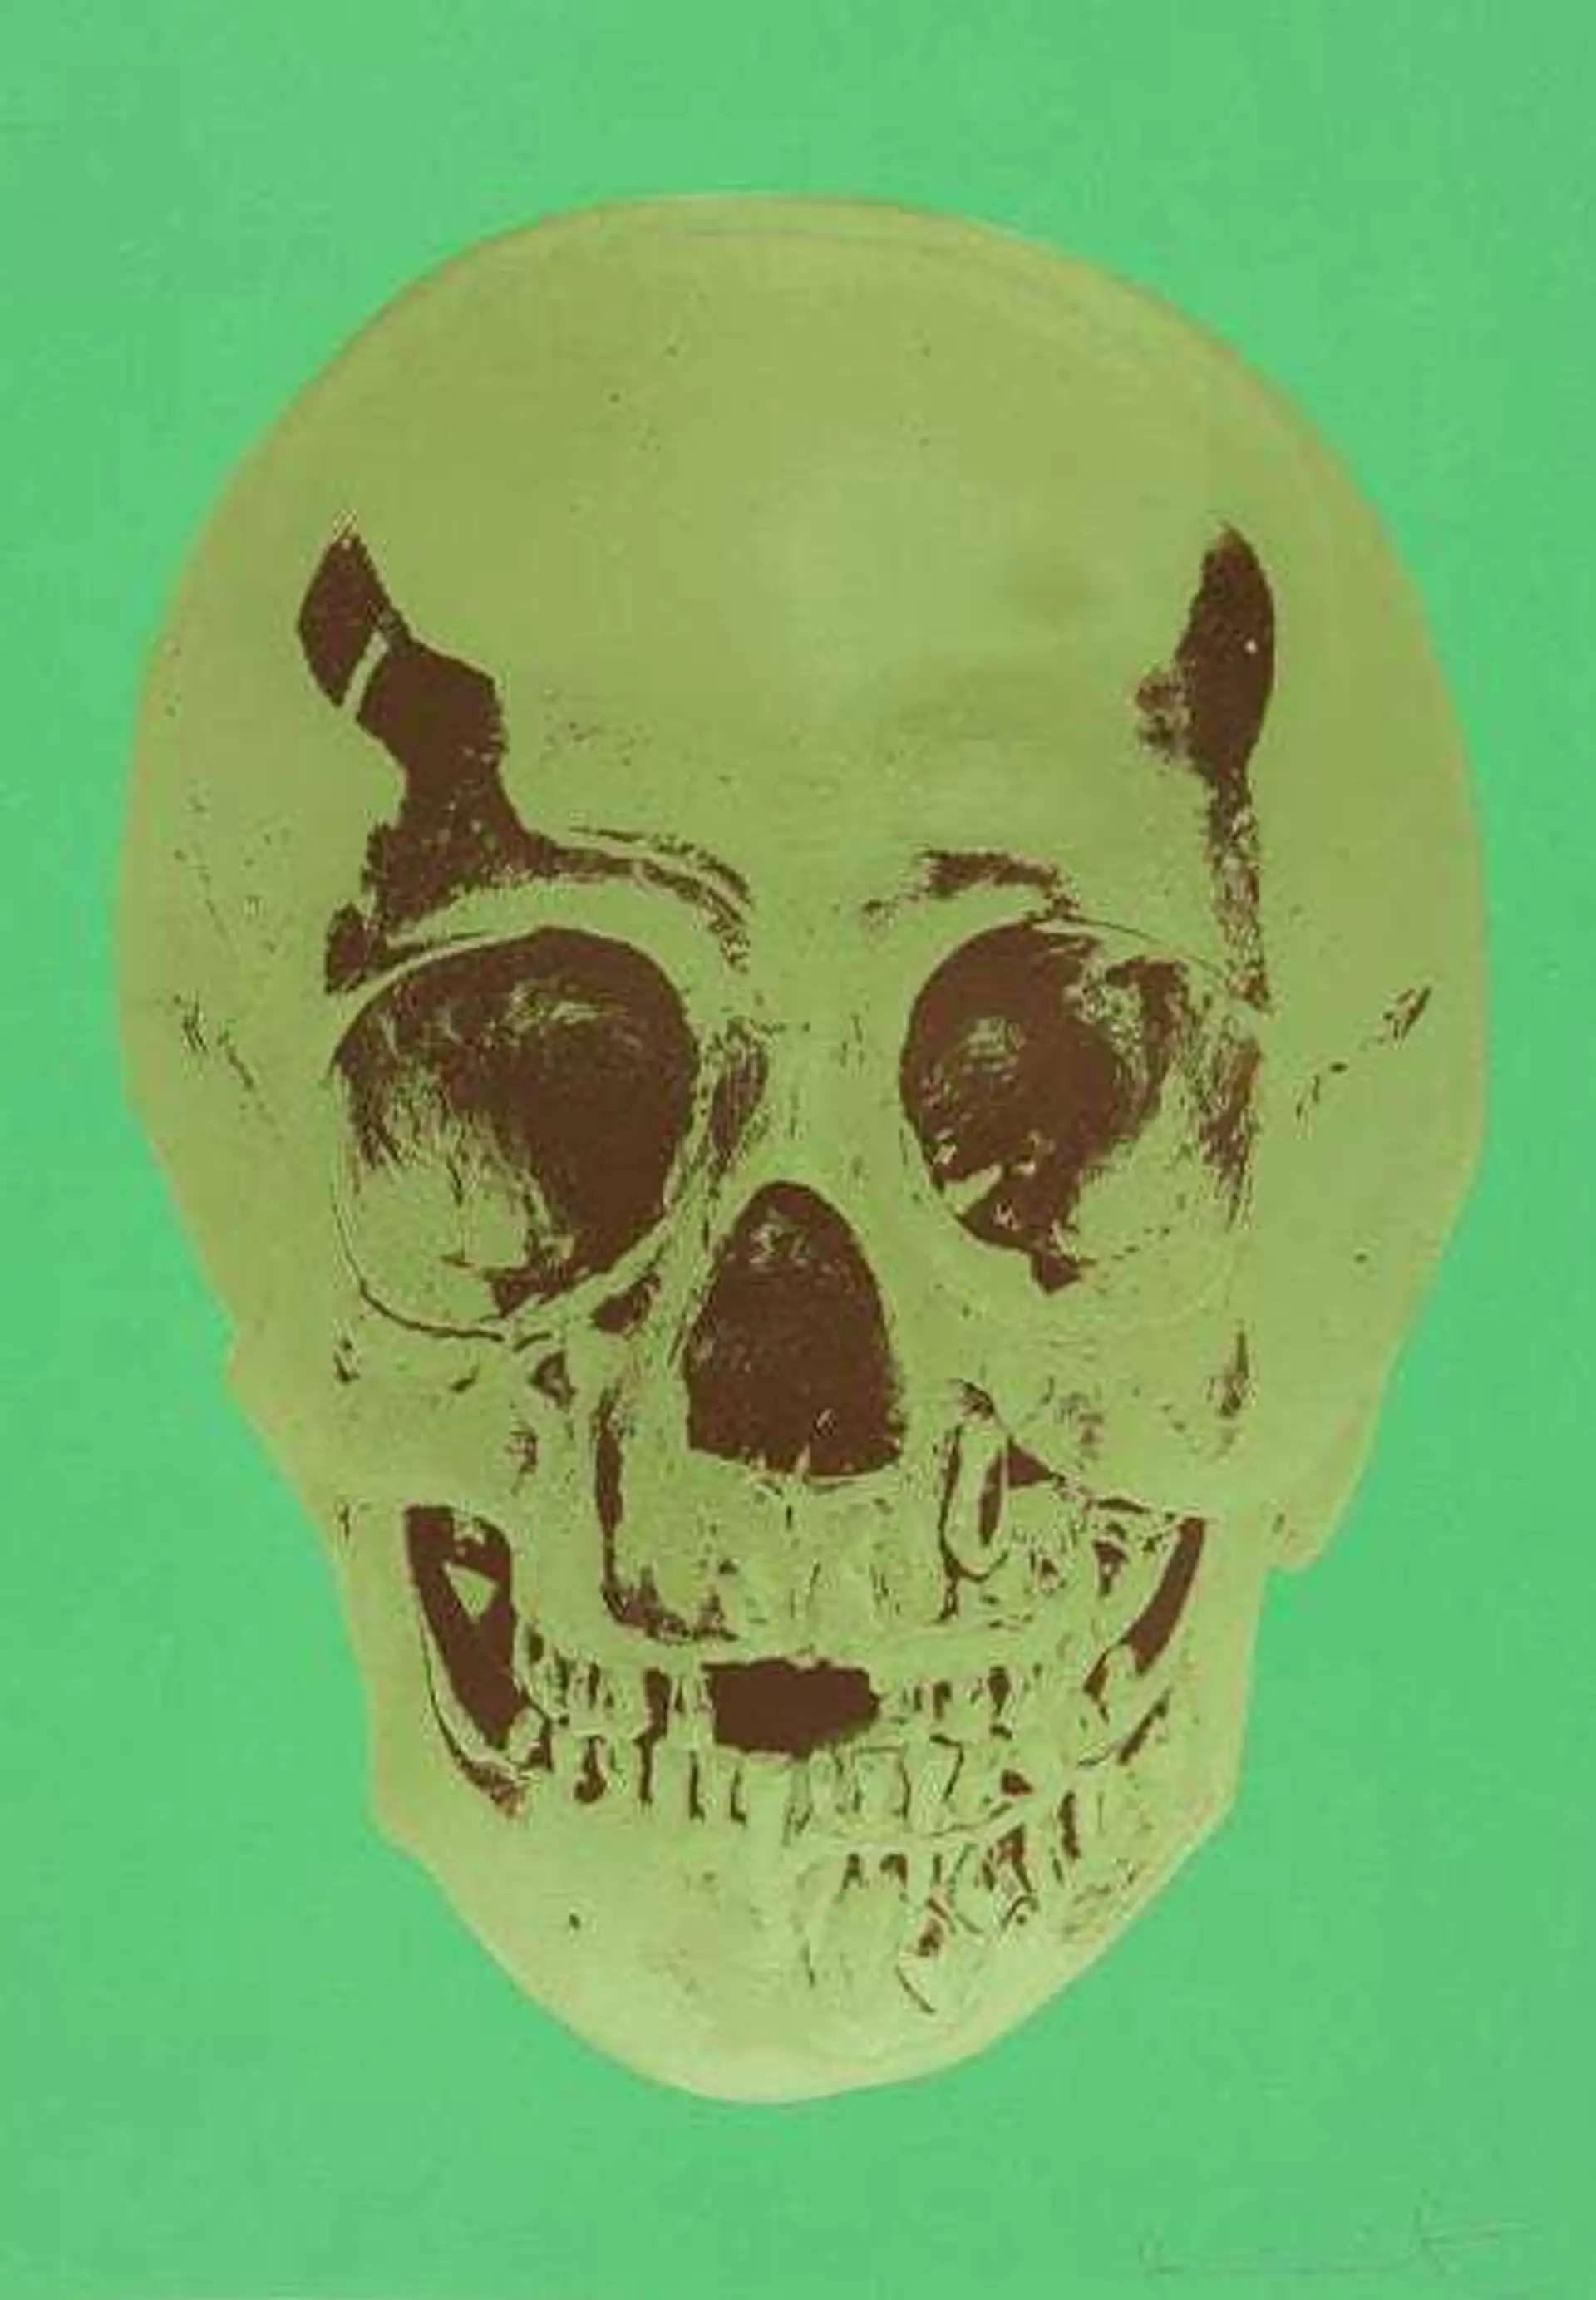 Till Death Do Us Part (viridian leaf, green, chocolate) by Damien Hirst